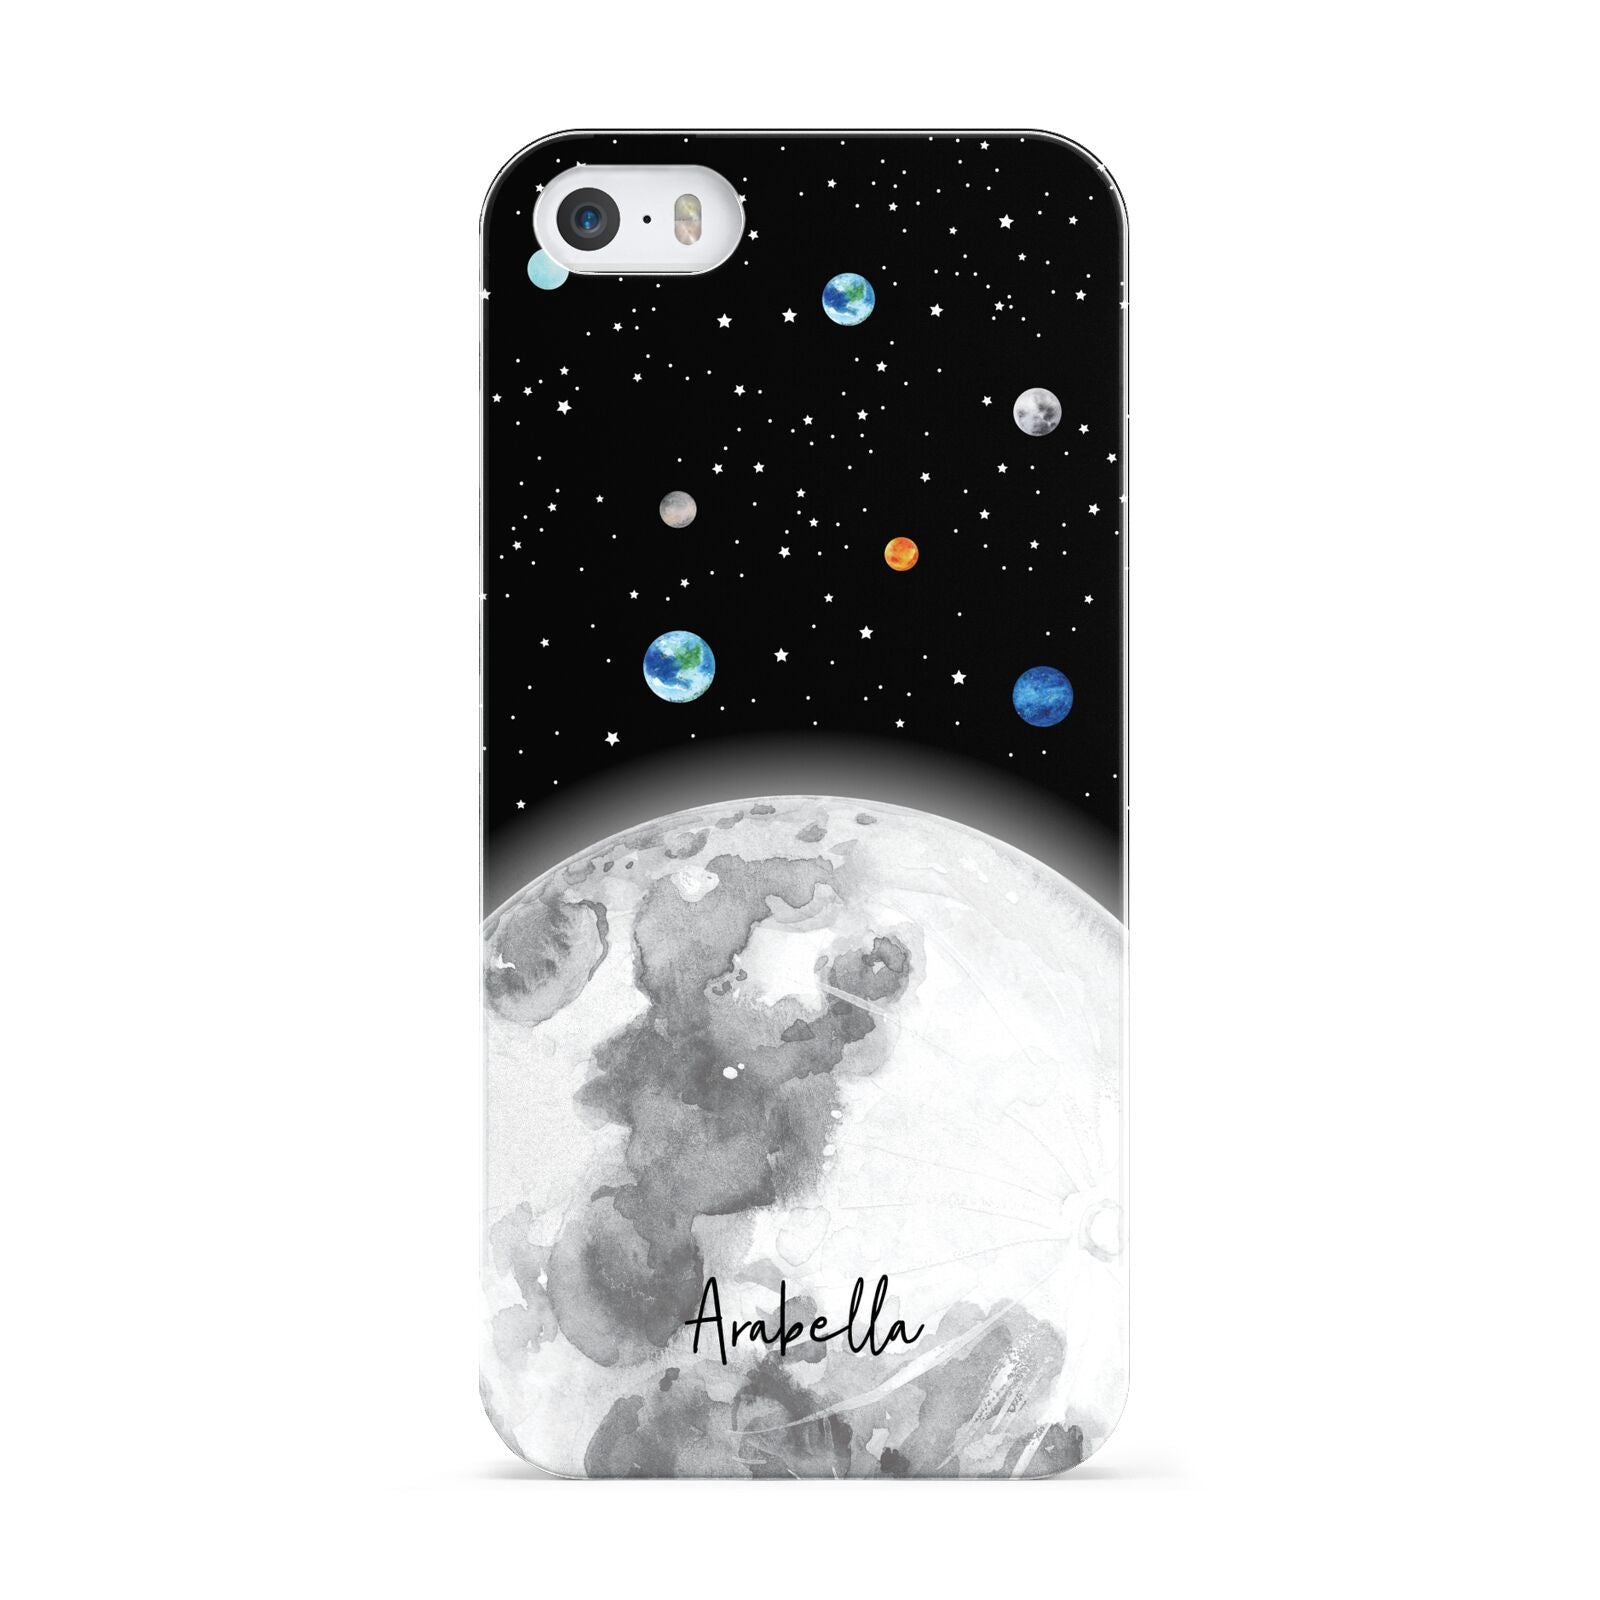 Watercolour Close up Moon with Name Apple iPhone 5 Case